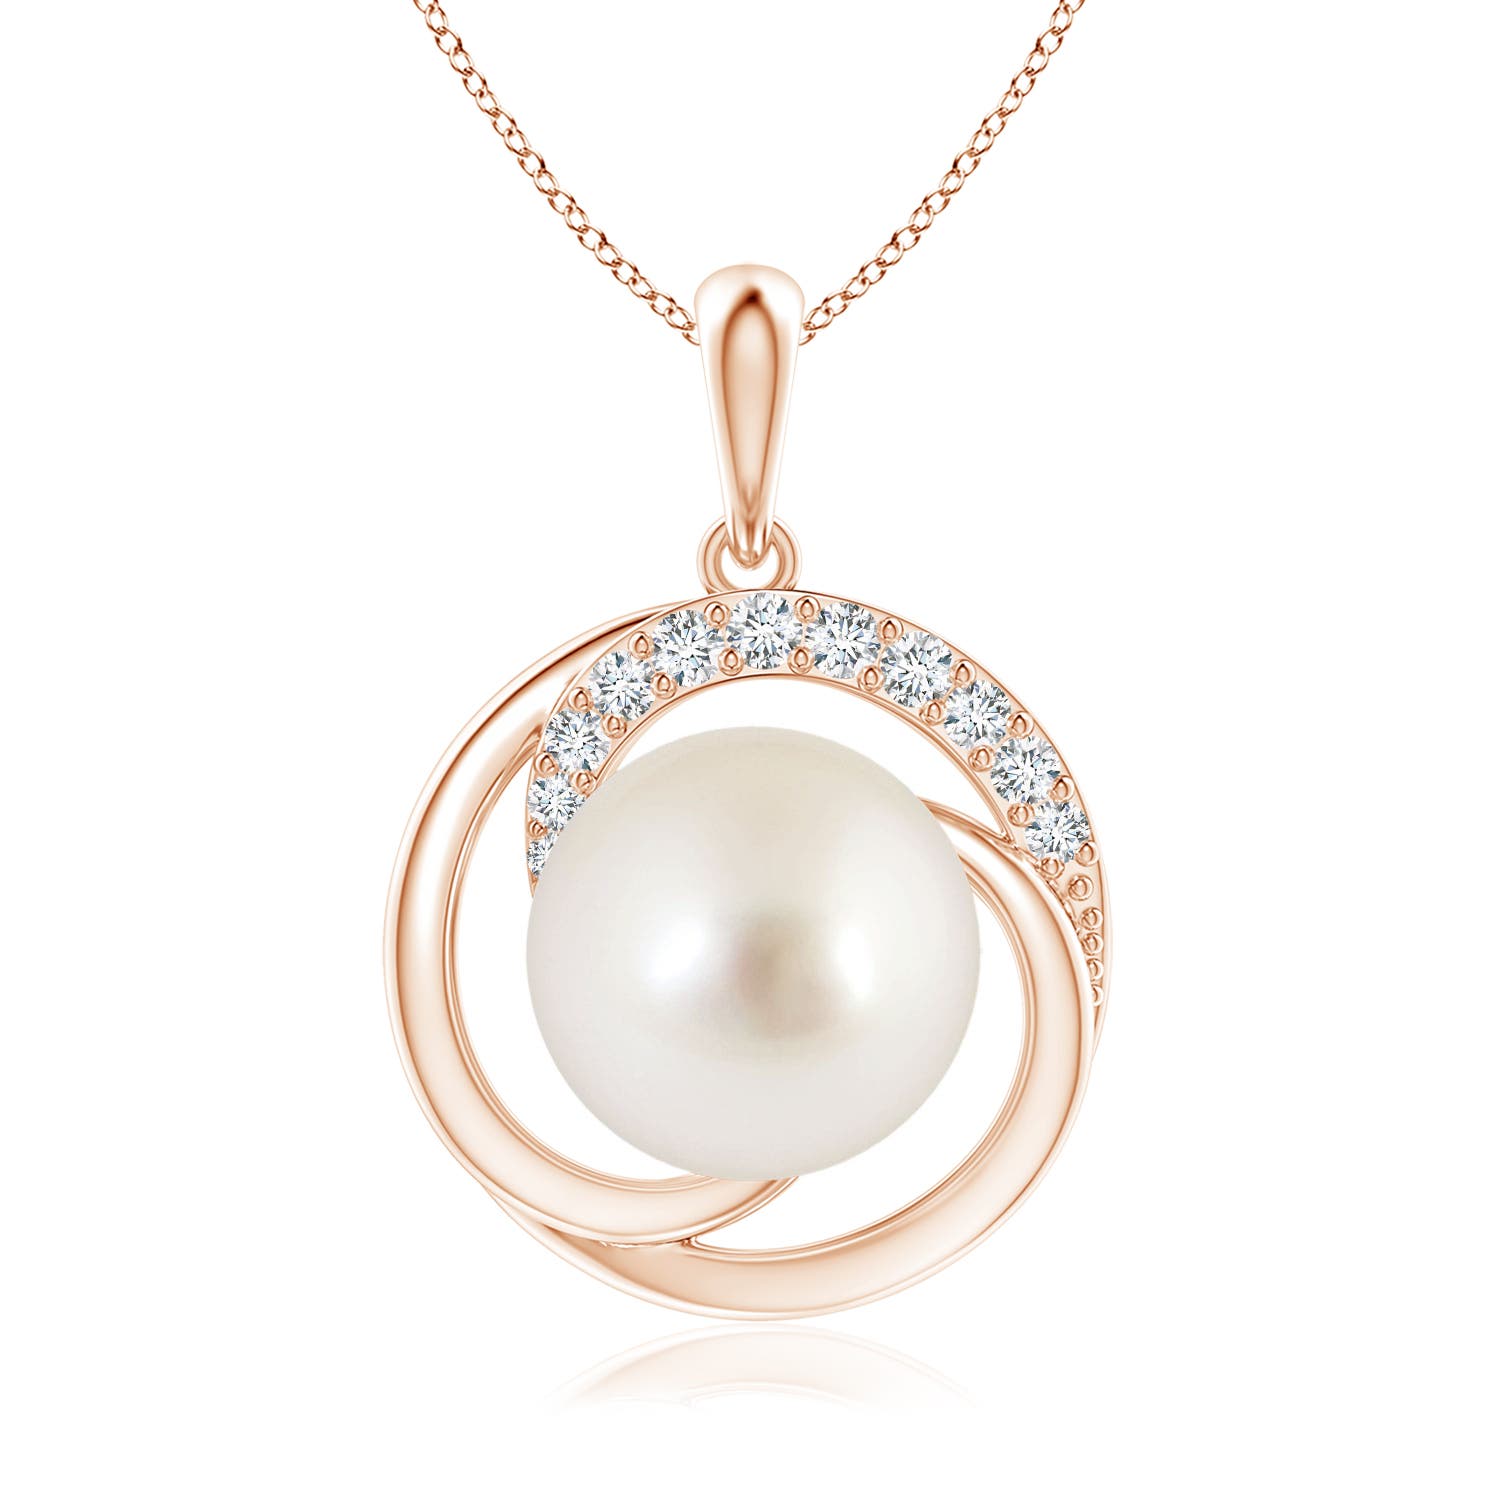 AAAA - South Sea Cultured Pearl / 7.33 CT / 14 KT Rose Gold